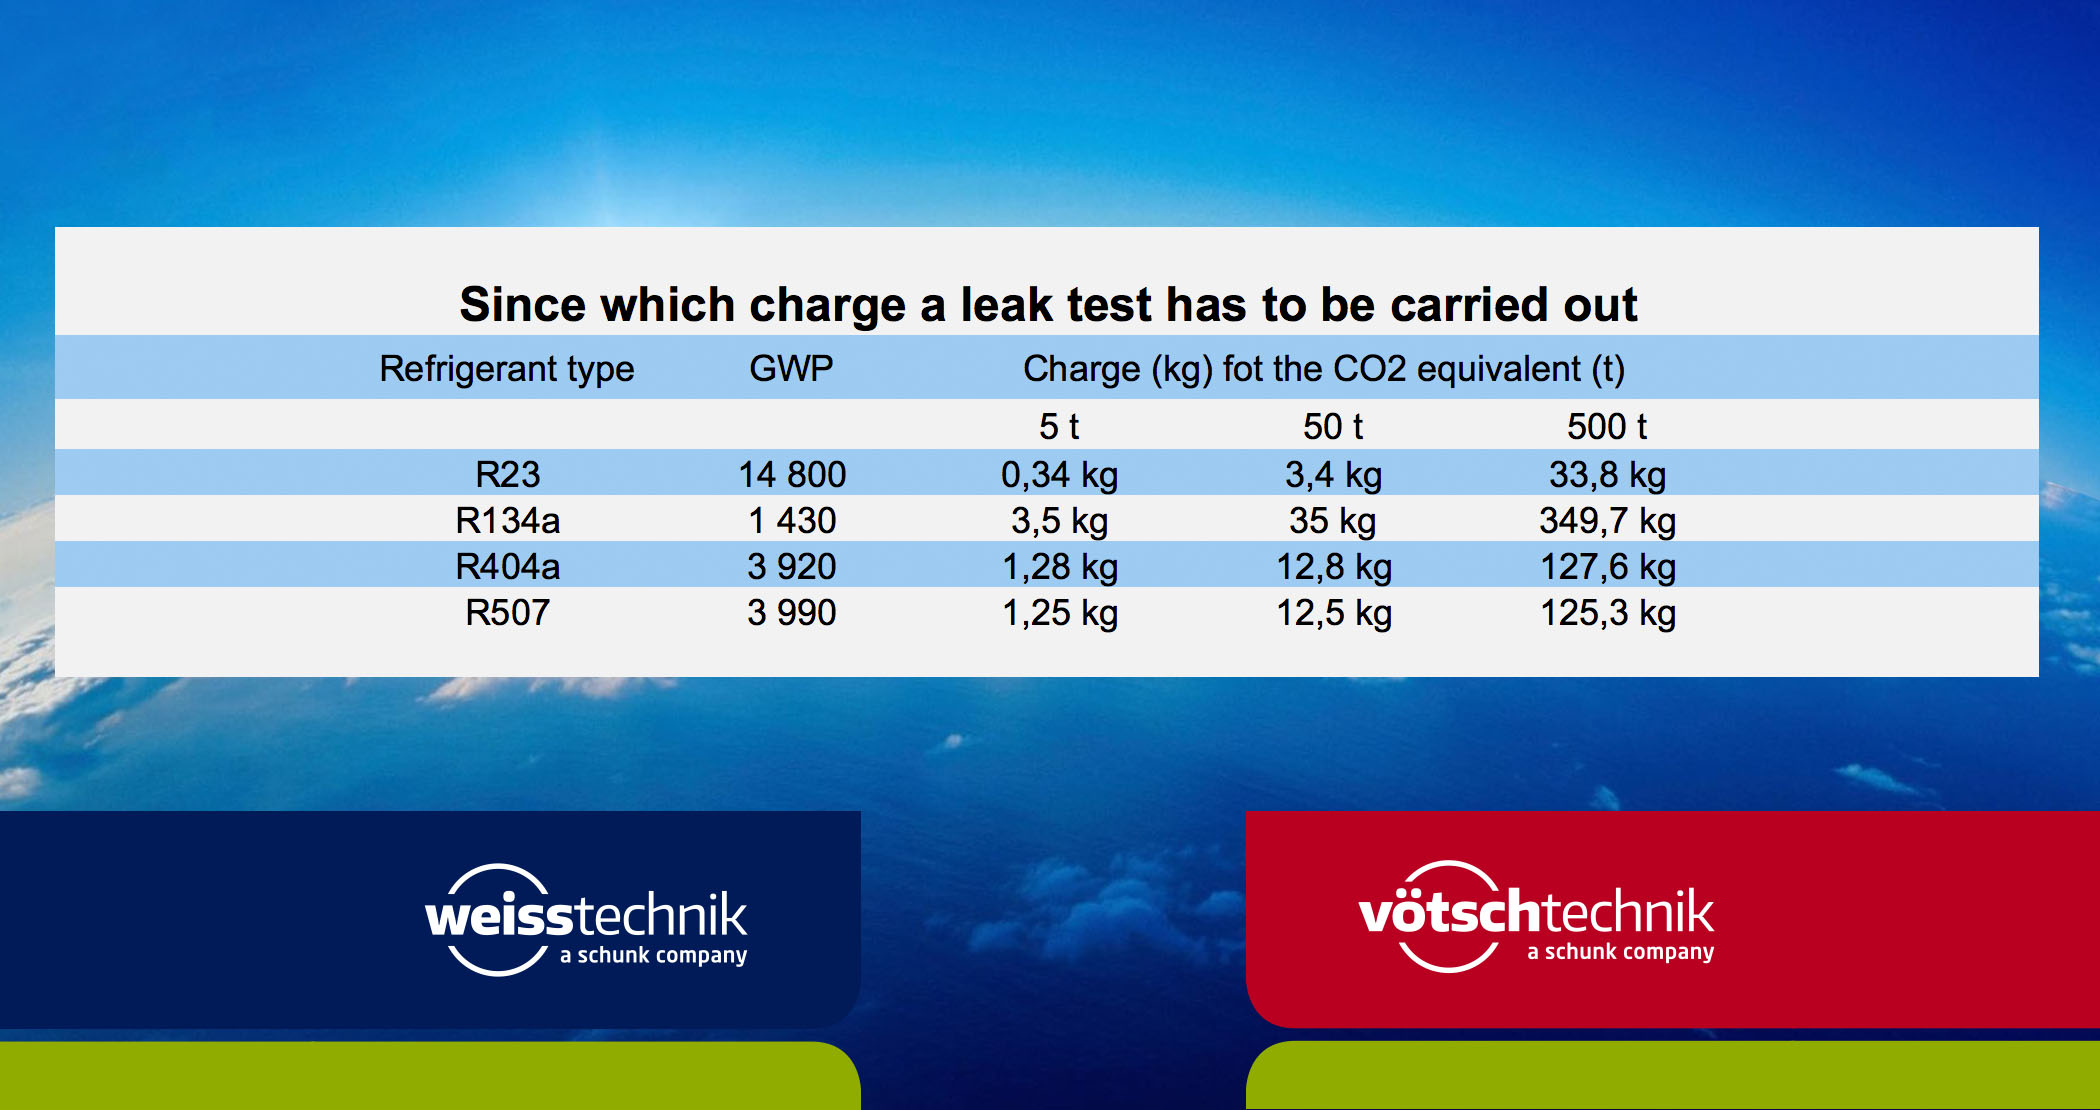 Since which charge a leak test has to be carried out